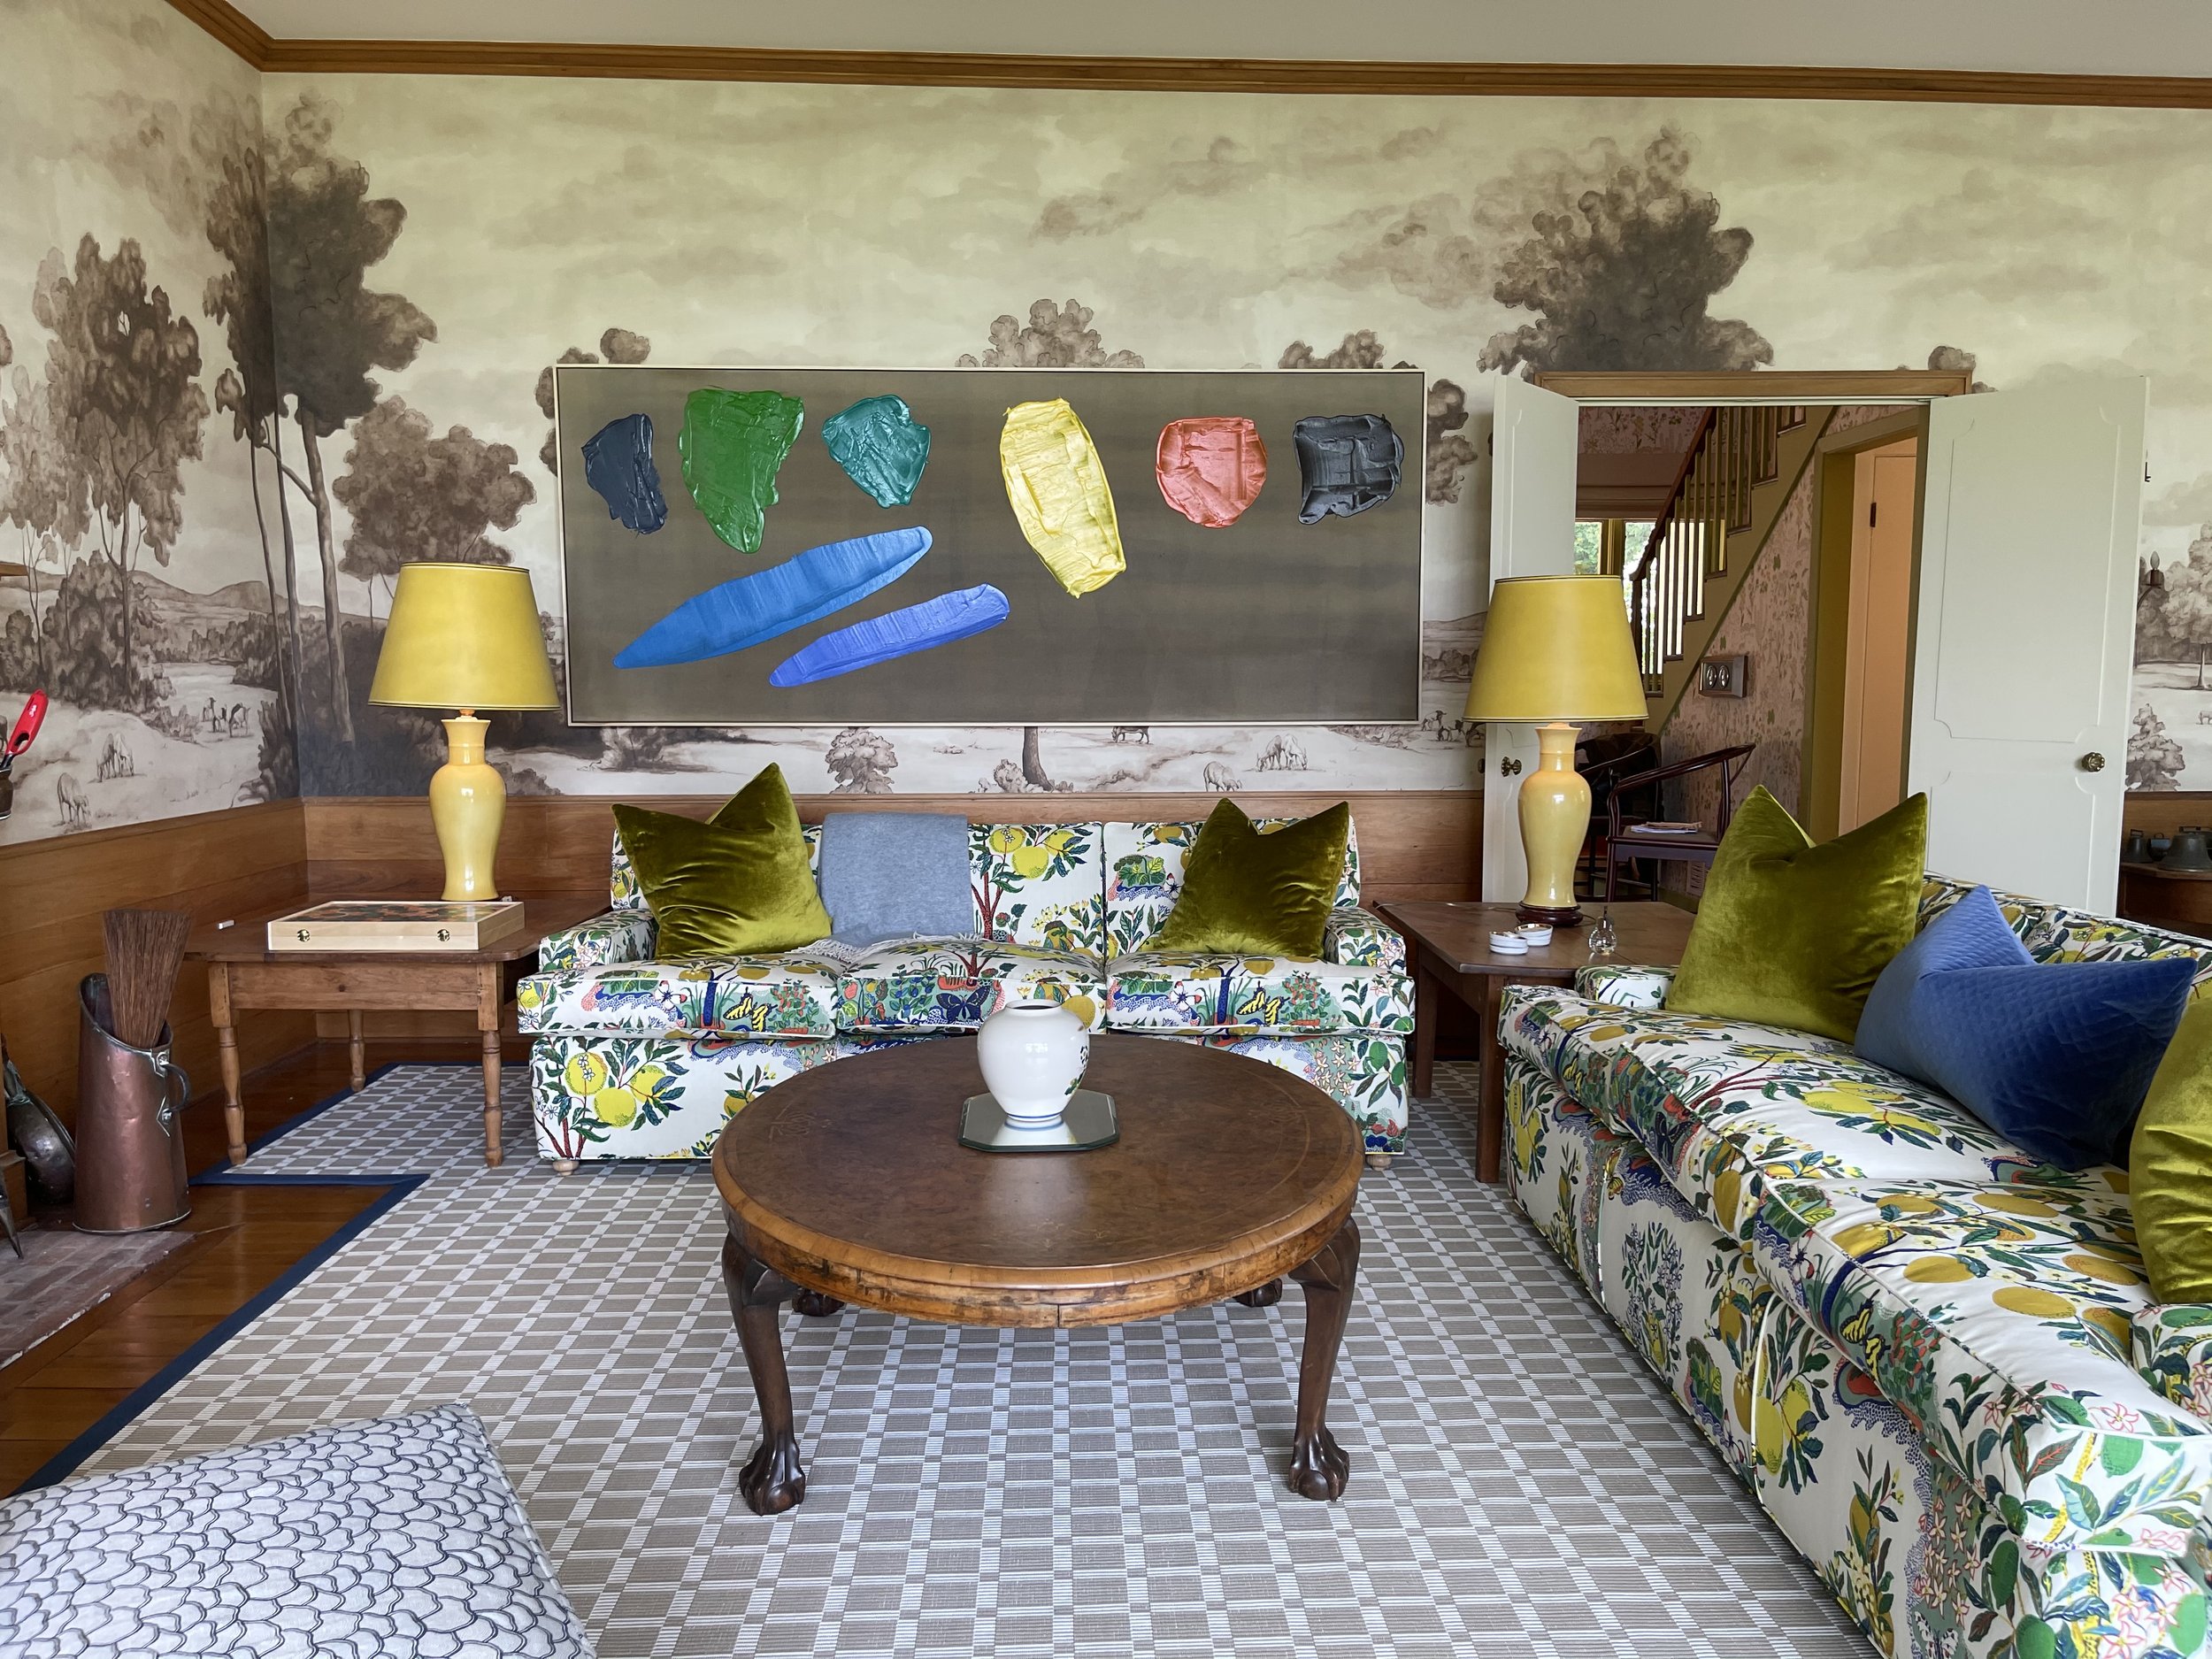 This large Perehudoff painting fits perfectly into this eclectic home in Knowlton. Photo credit to Luke Havekes Design